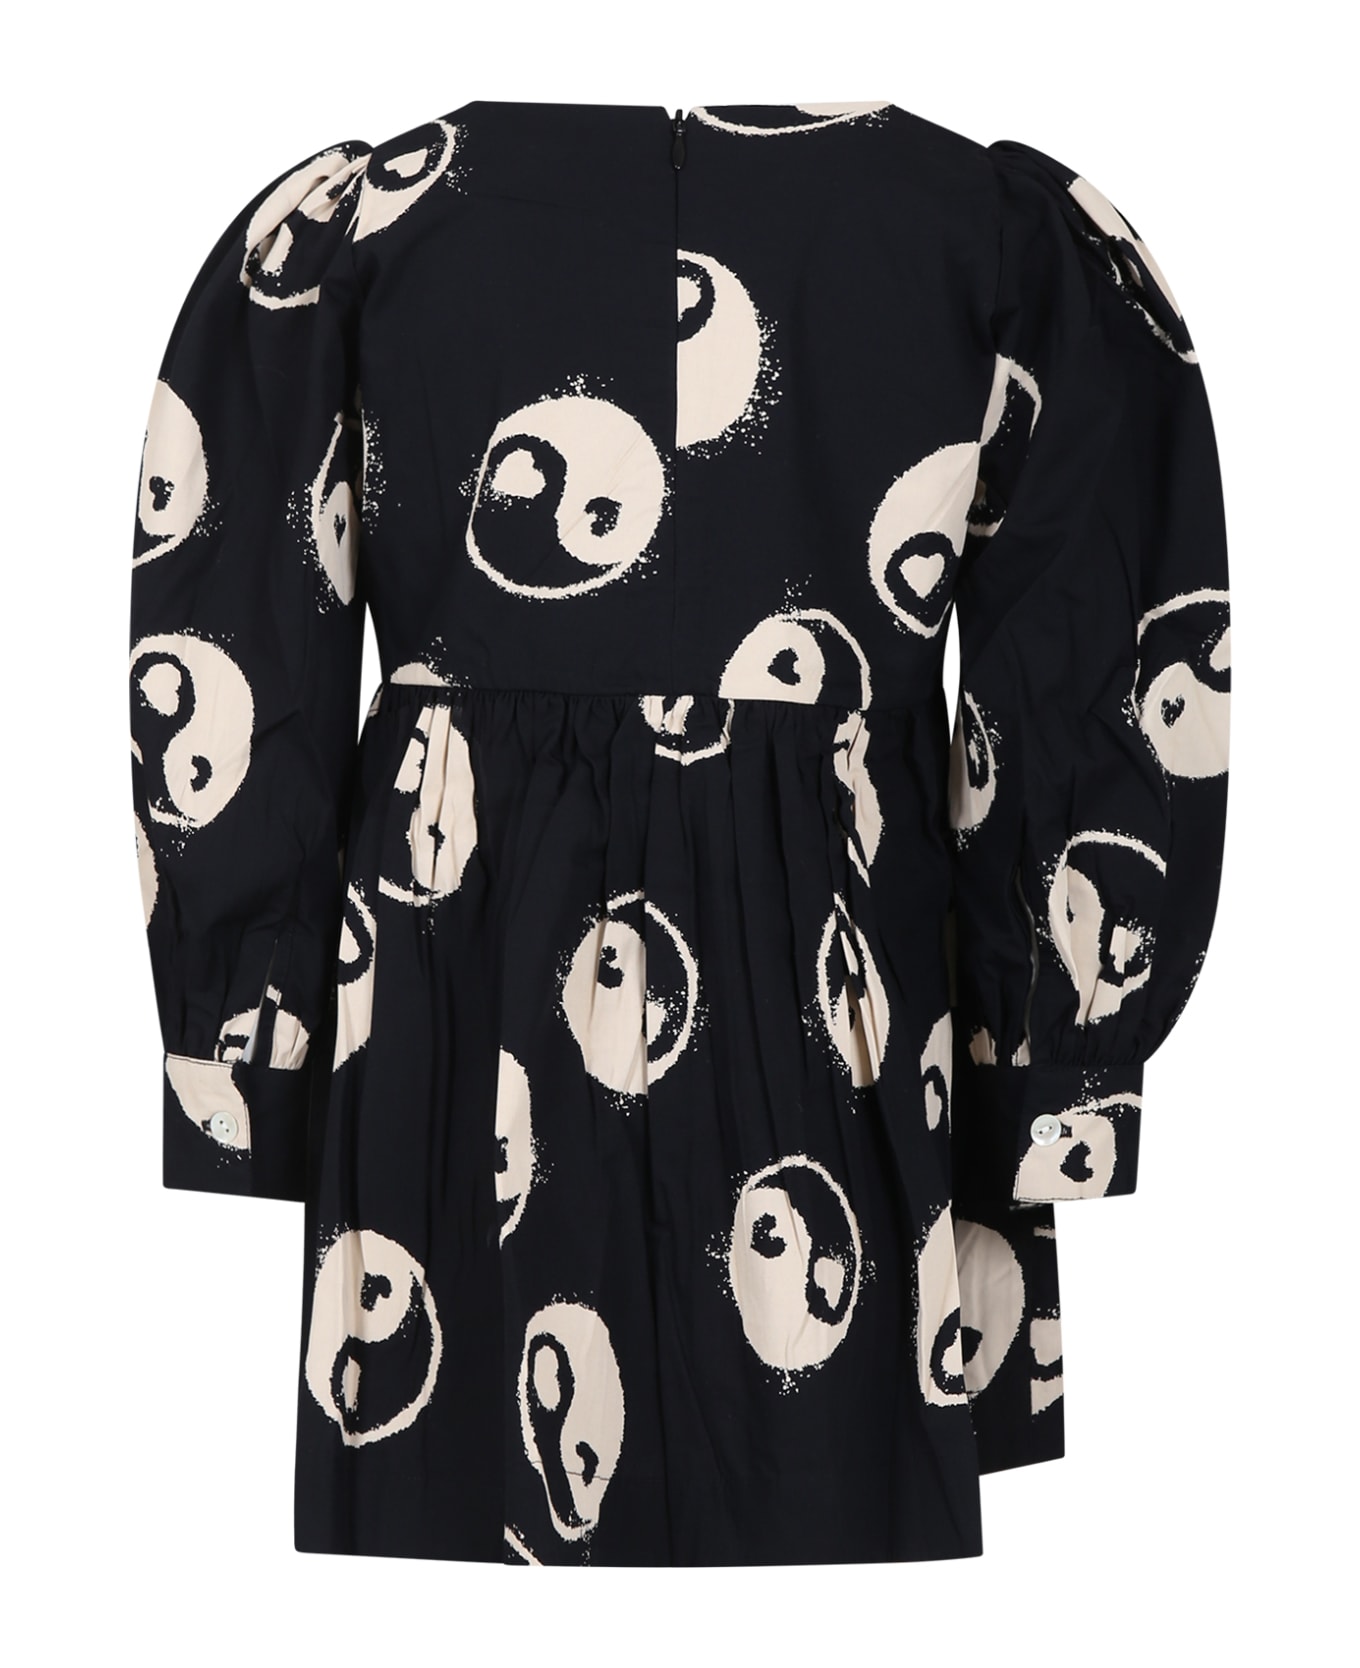 Molo Black Dress For Girl With Yin And Yang Print - Black